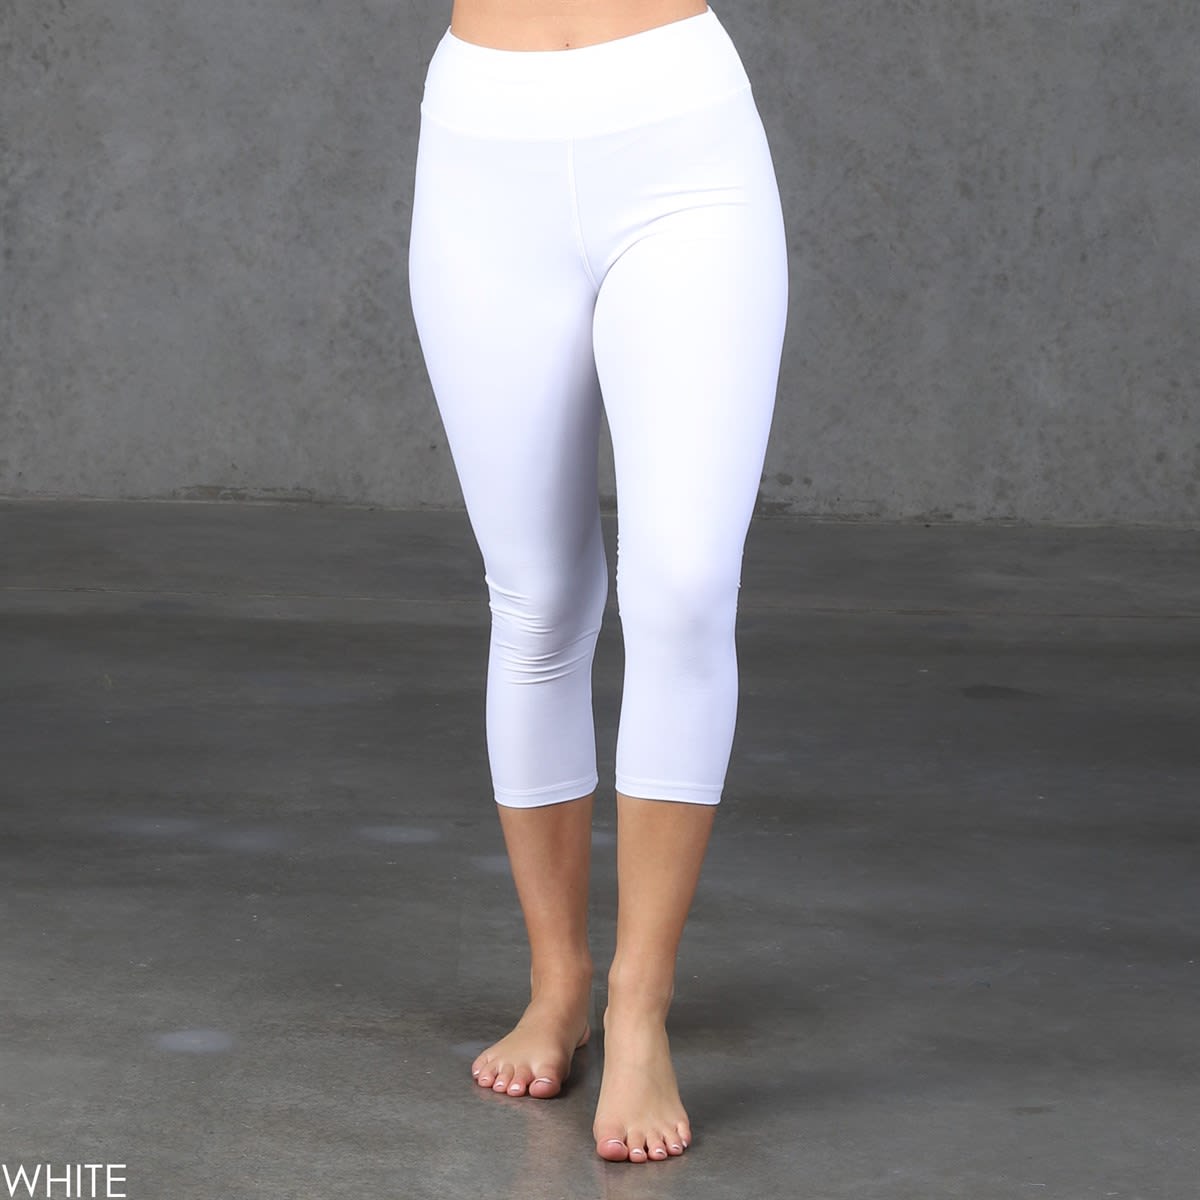 Womens, Juniors, Misses Solid Capri Leggings with Buttery Soft Yoga-Style Waistband. Sizing:  One Size OS 0-10 Tall & Curvy TC 12-18 PLUS 18-28 available in 4 colors: Black, Charcoal Grey Gray, Brown Coffee, White